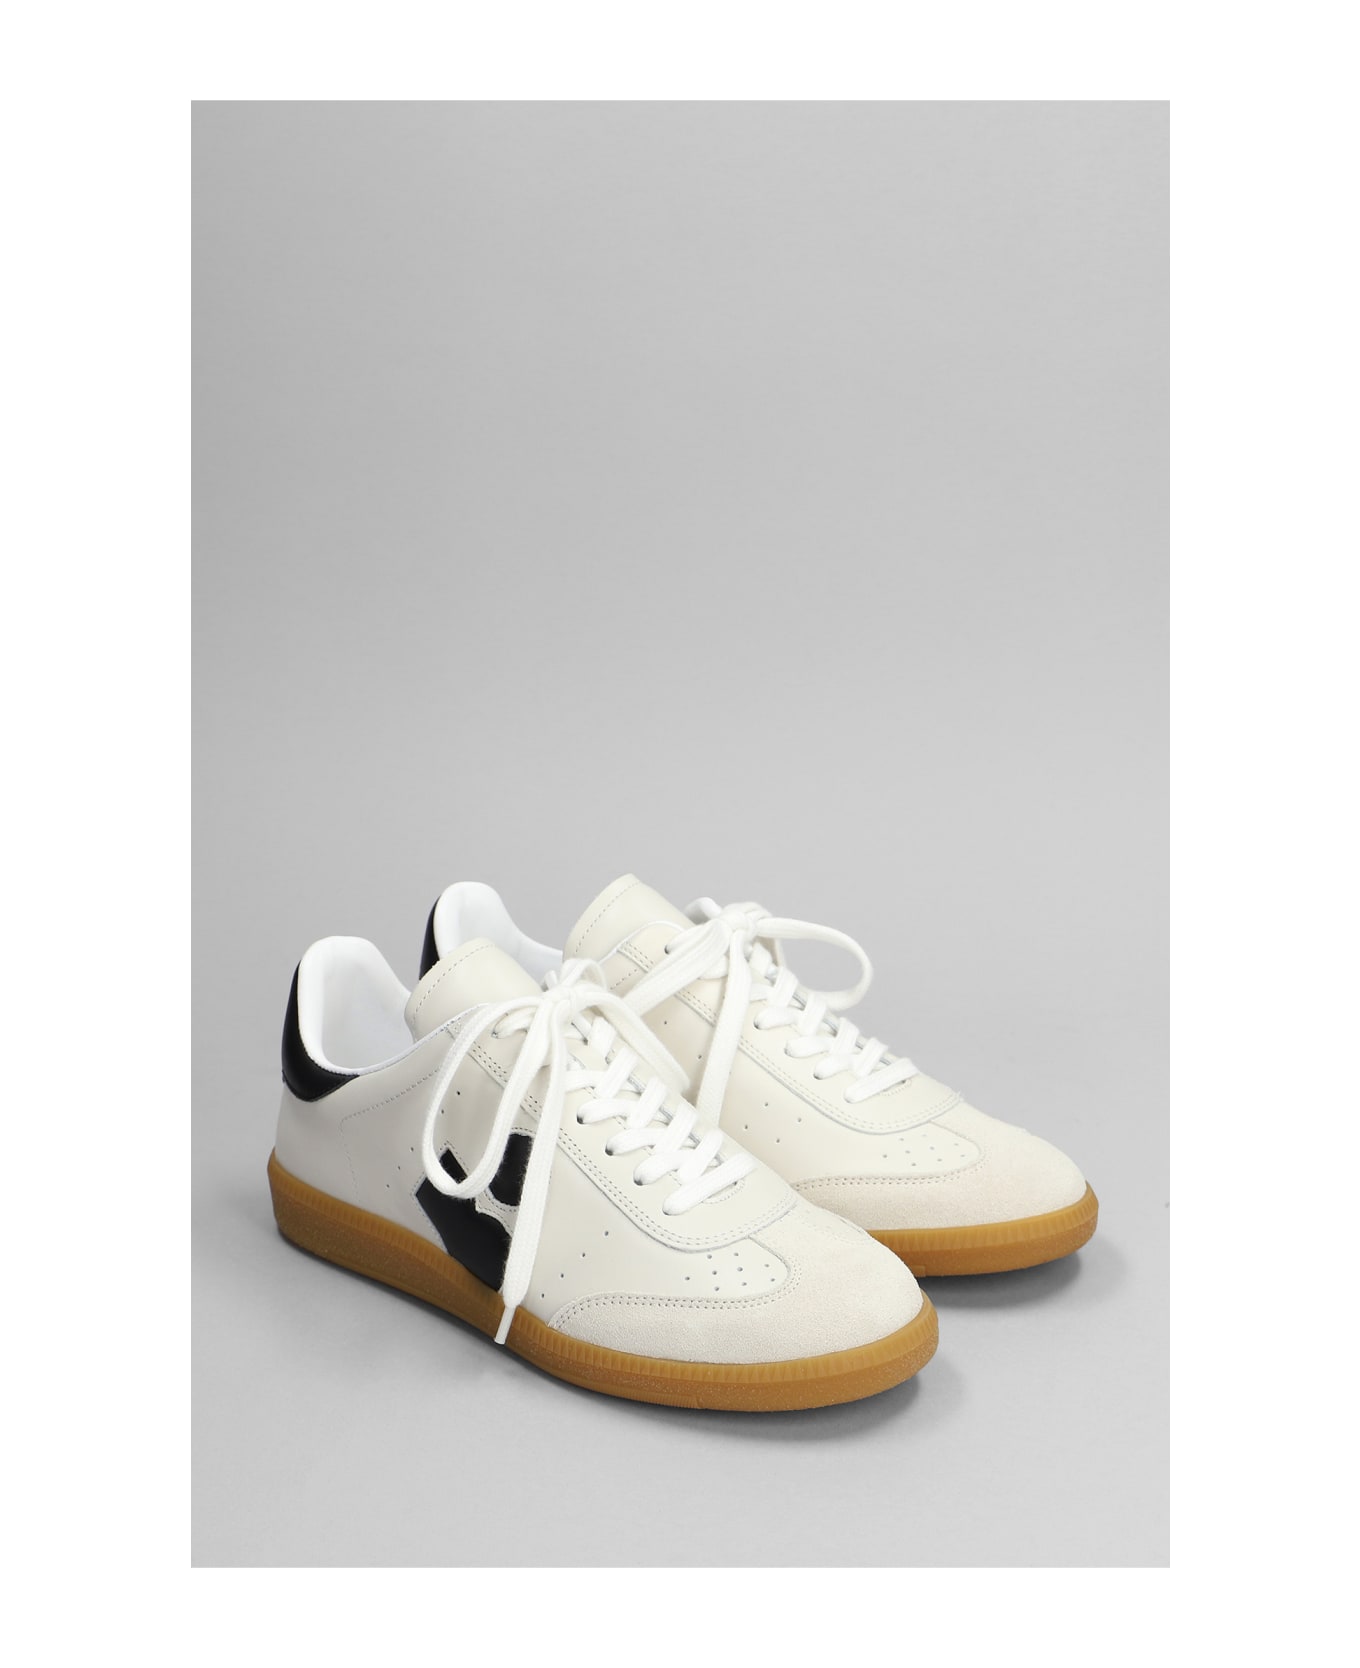 Isabel Marant Bryce Sneakers In Grey Suede And Leather - grey